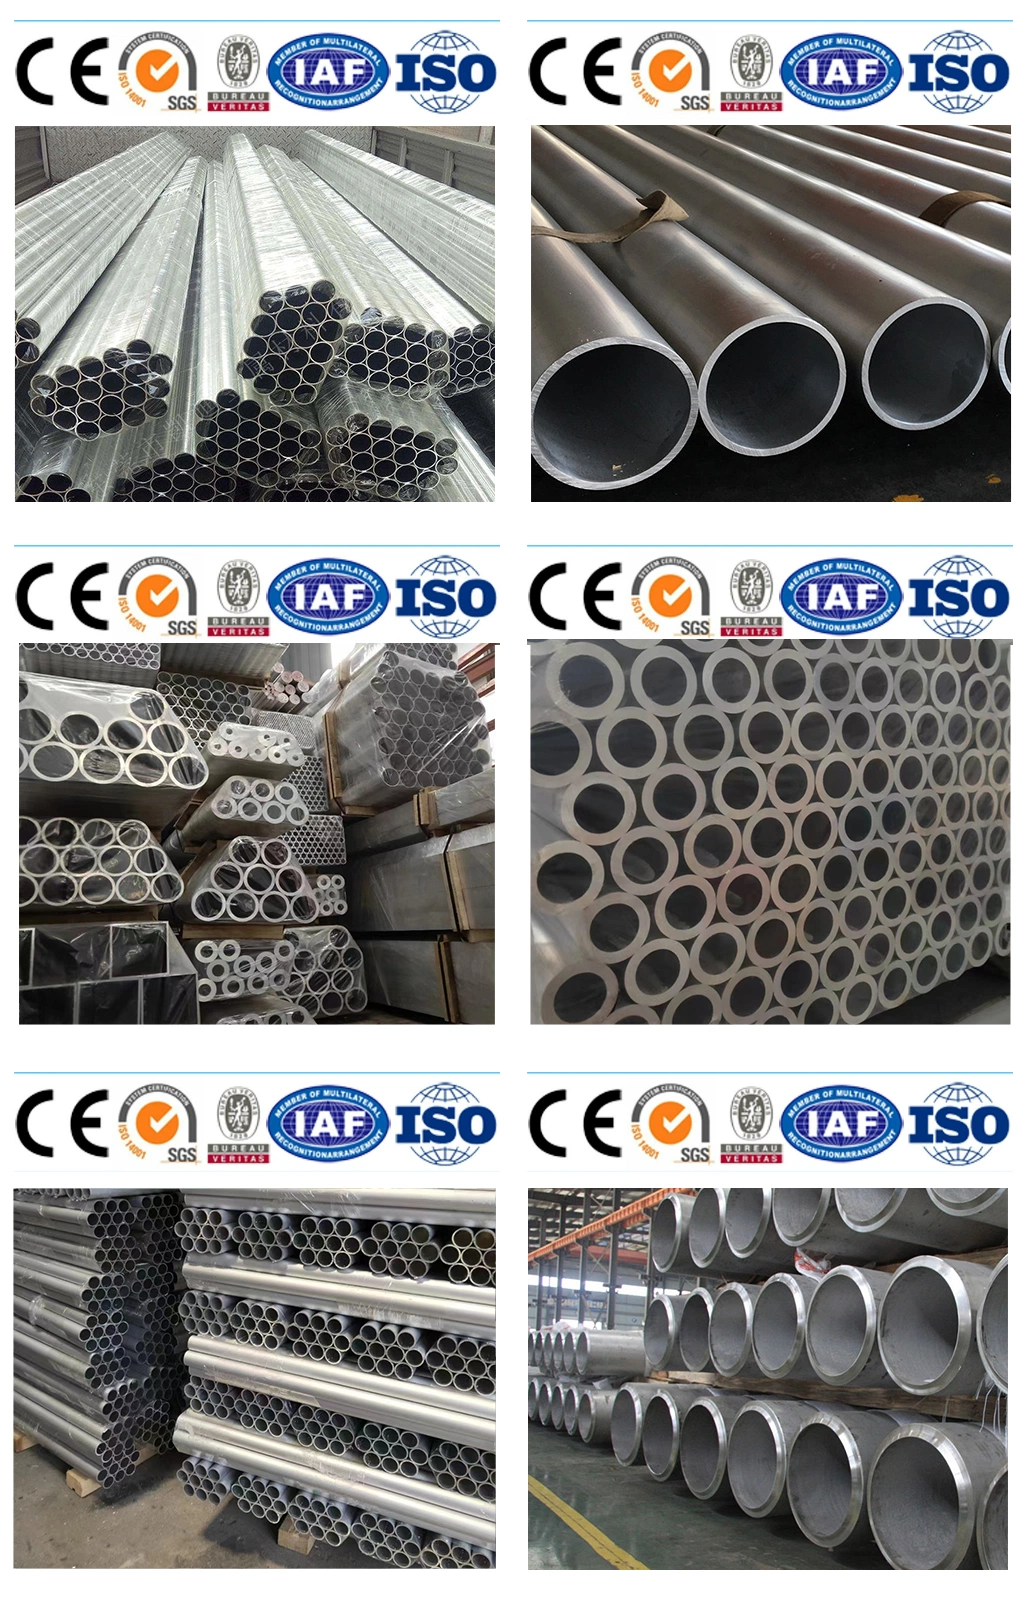 6061 6063 7005 7075 T6 600mm Diameter Cold Drawn Thin Wall Seamless Aluminium Pipe Tube for Sale